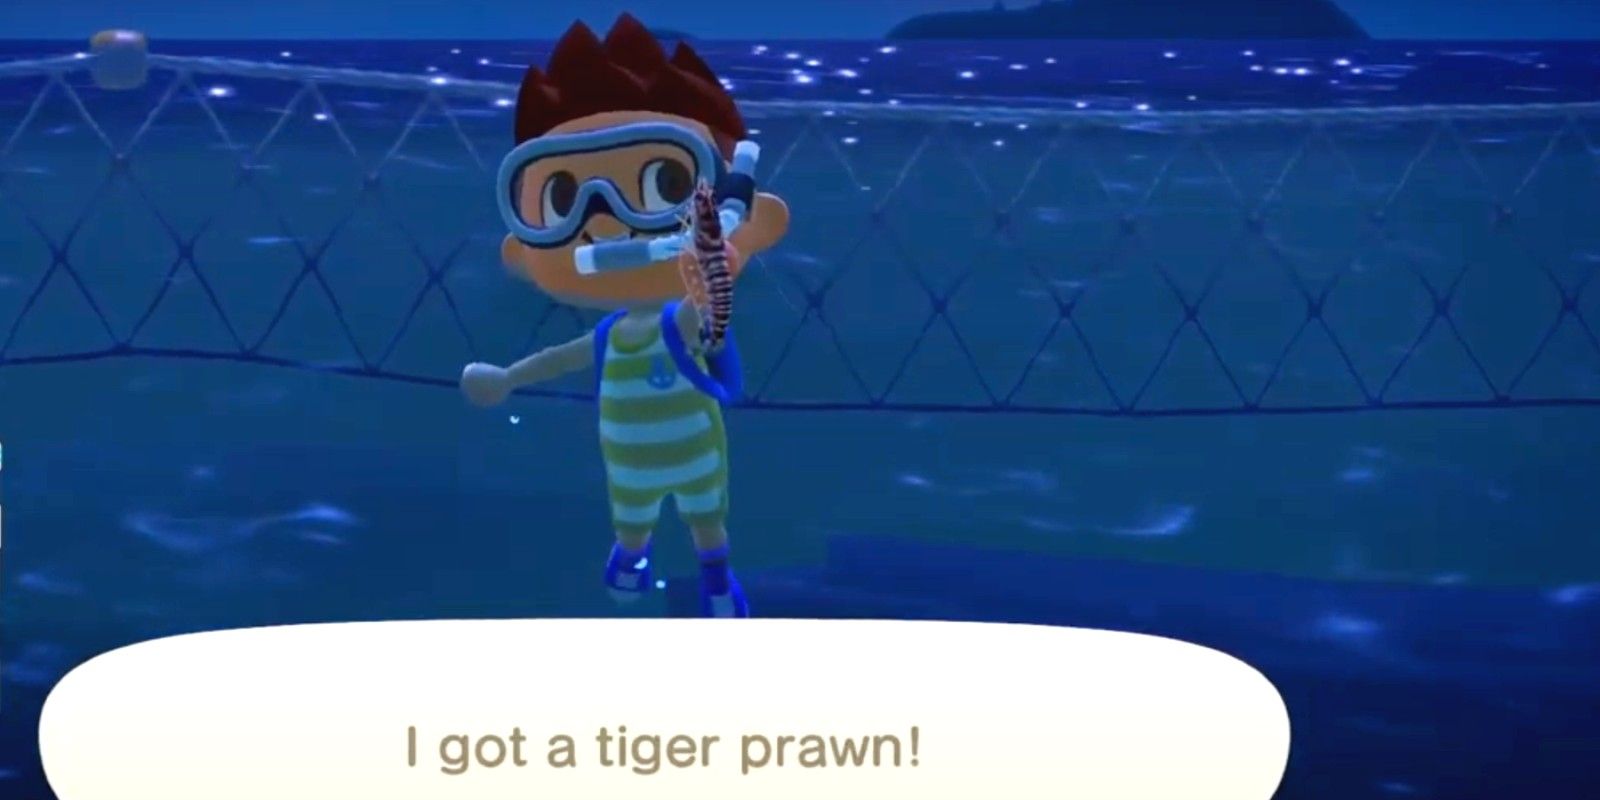 A player holds up the tiger prawn he caught by diving near the fence in Animal Crossing: New Horizons